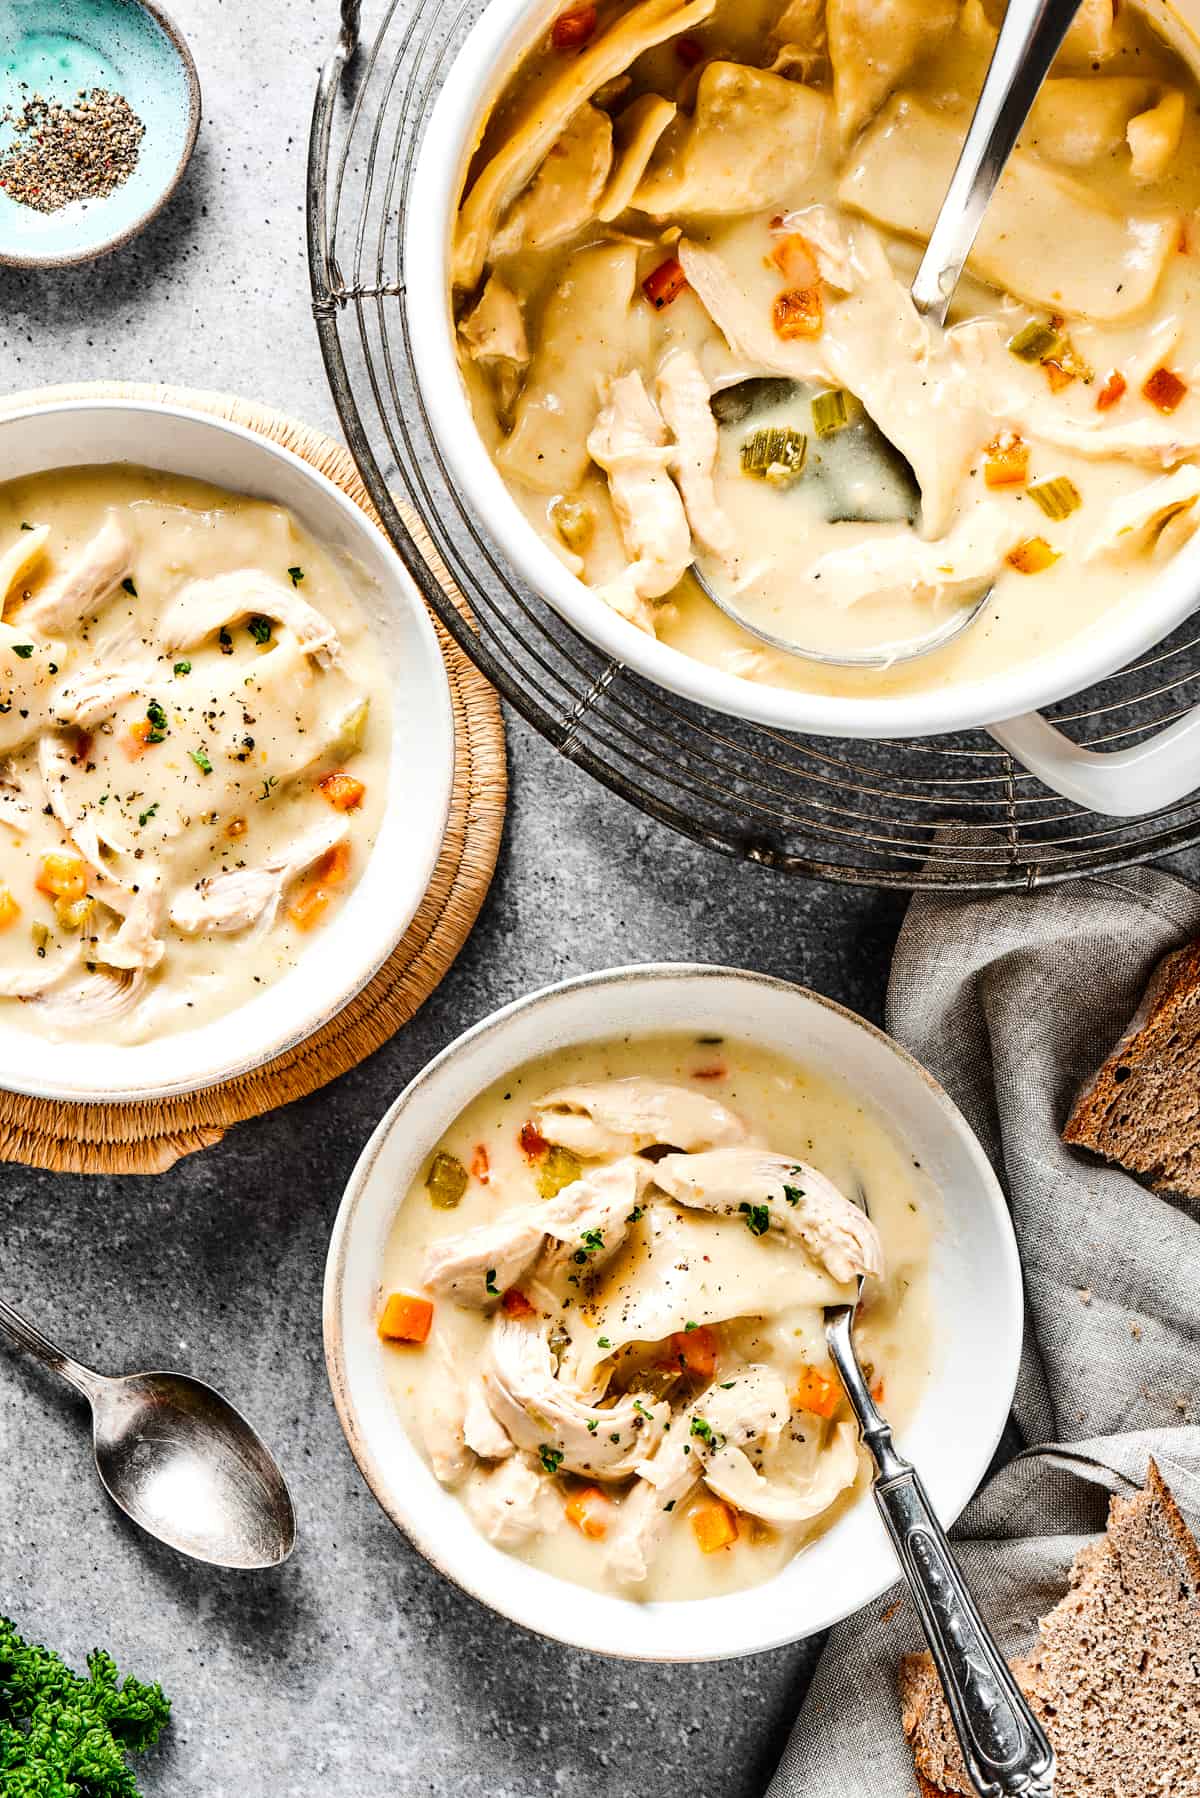 Creamy chicken and dumplings in a pot, along with two bowls of the dish.